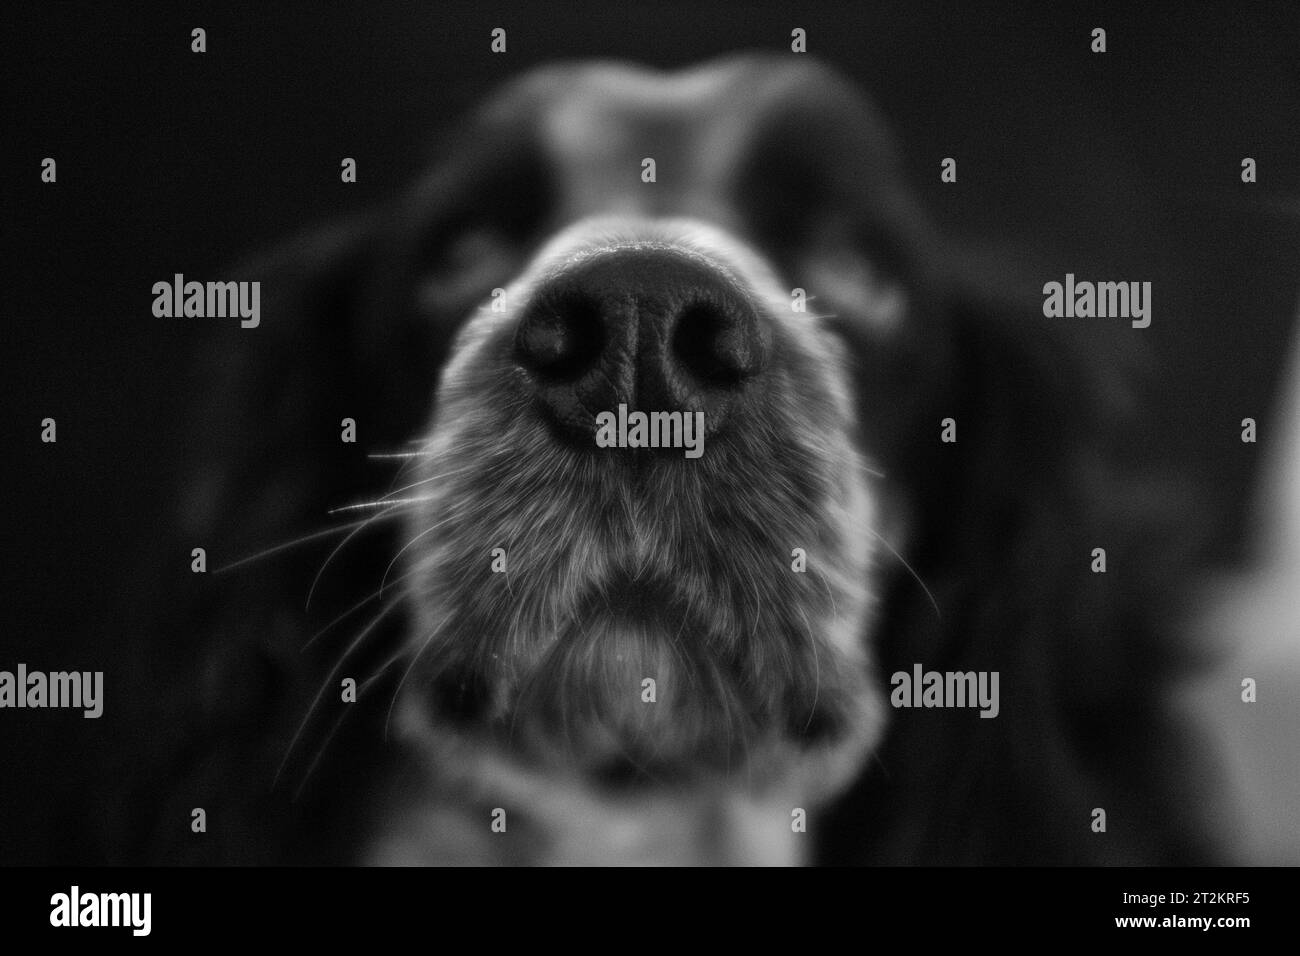 Close up photograph dog of a black and white cocker spaniel dog focusing on his nose Stock Photo